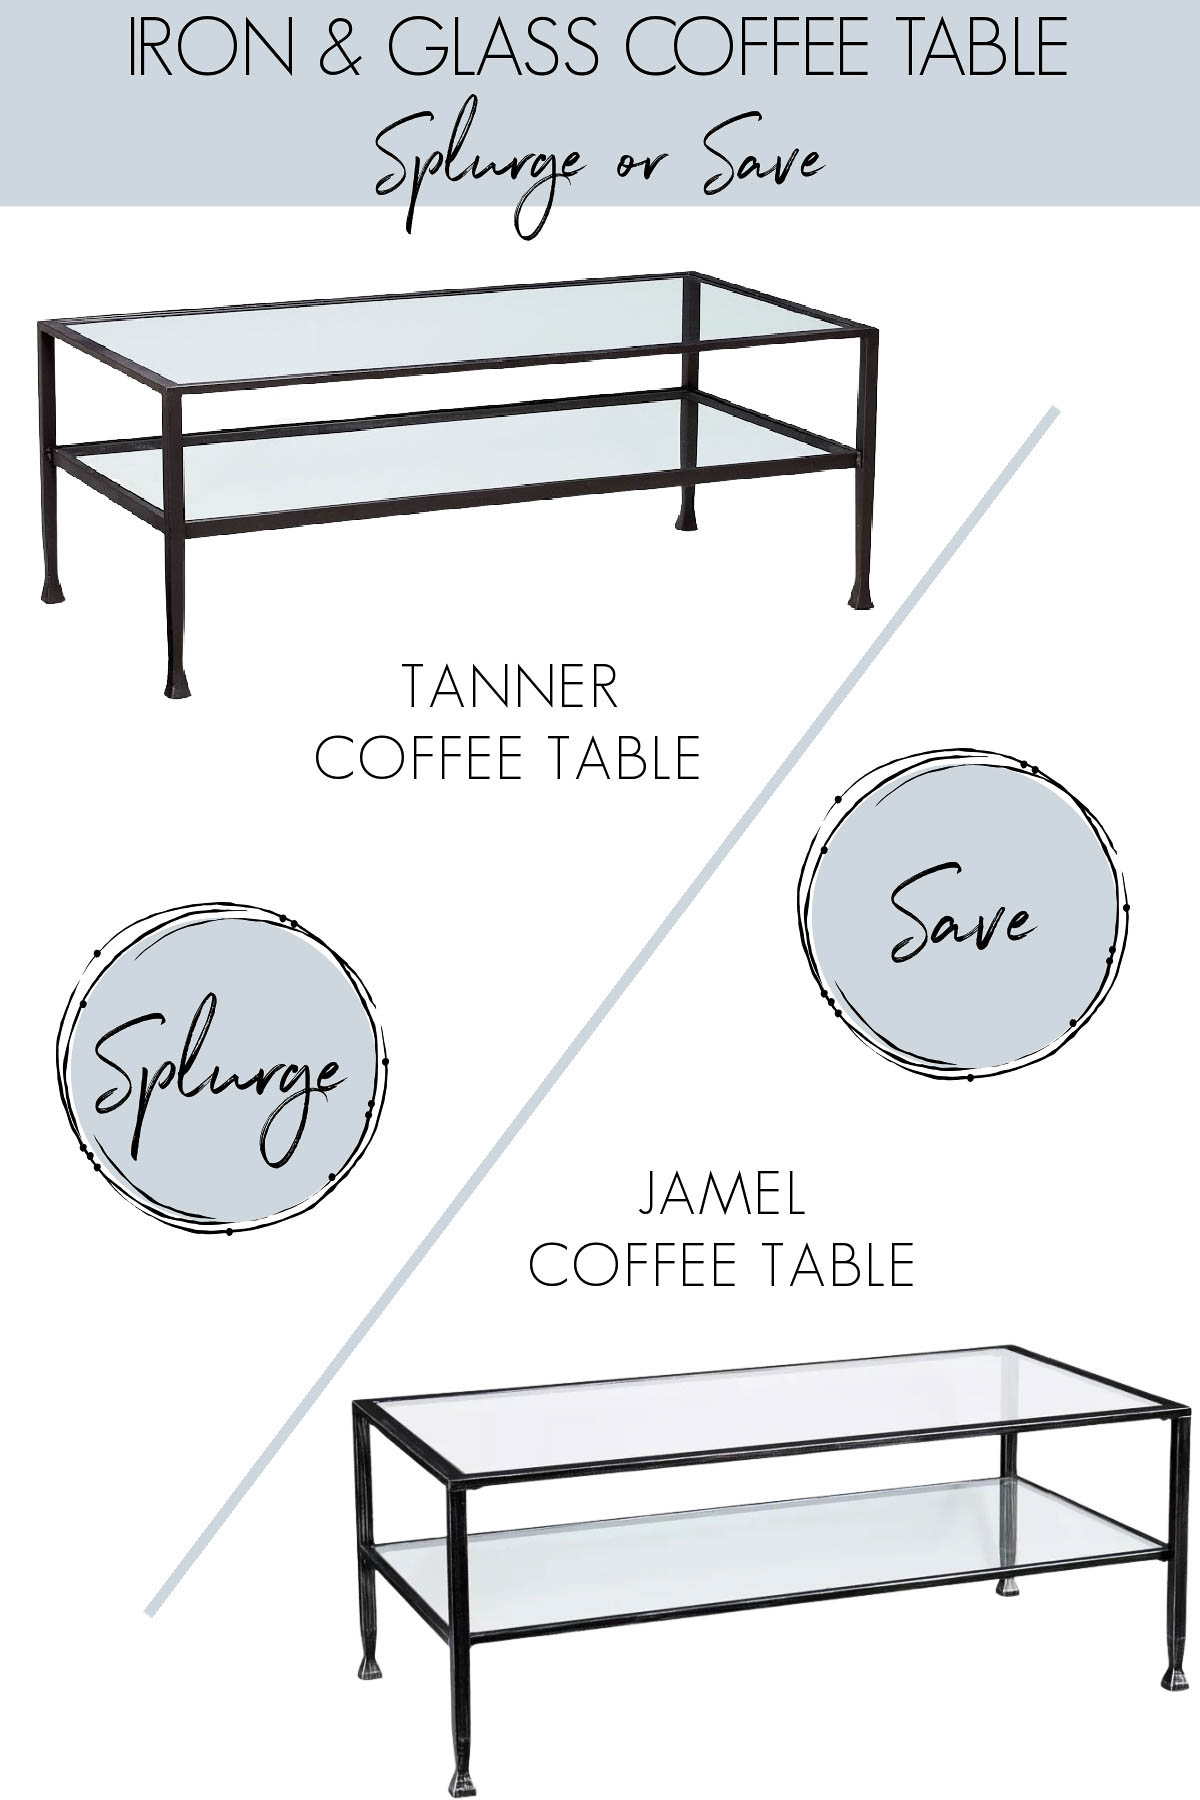 Splurge and save designer looks for less version of iron coffee table